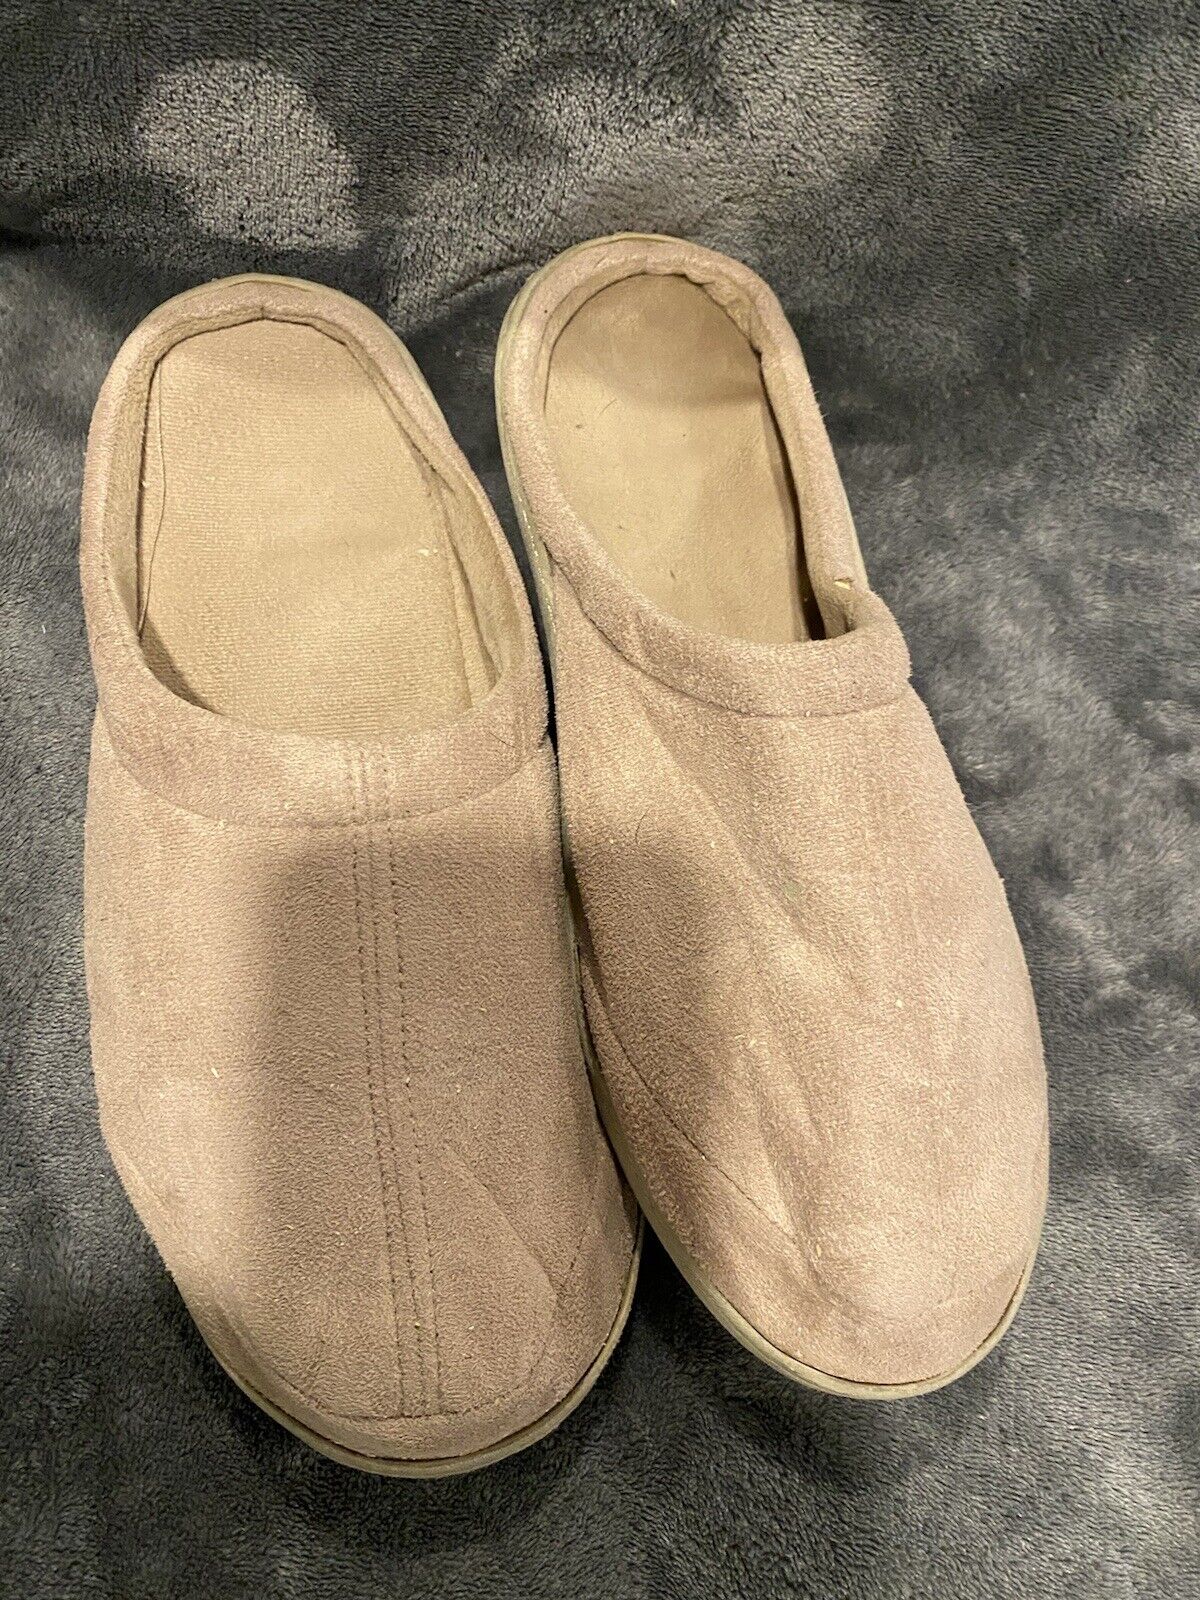 Used Worn House Slippers Shoes Size XL (2 Pair) - image 4